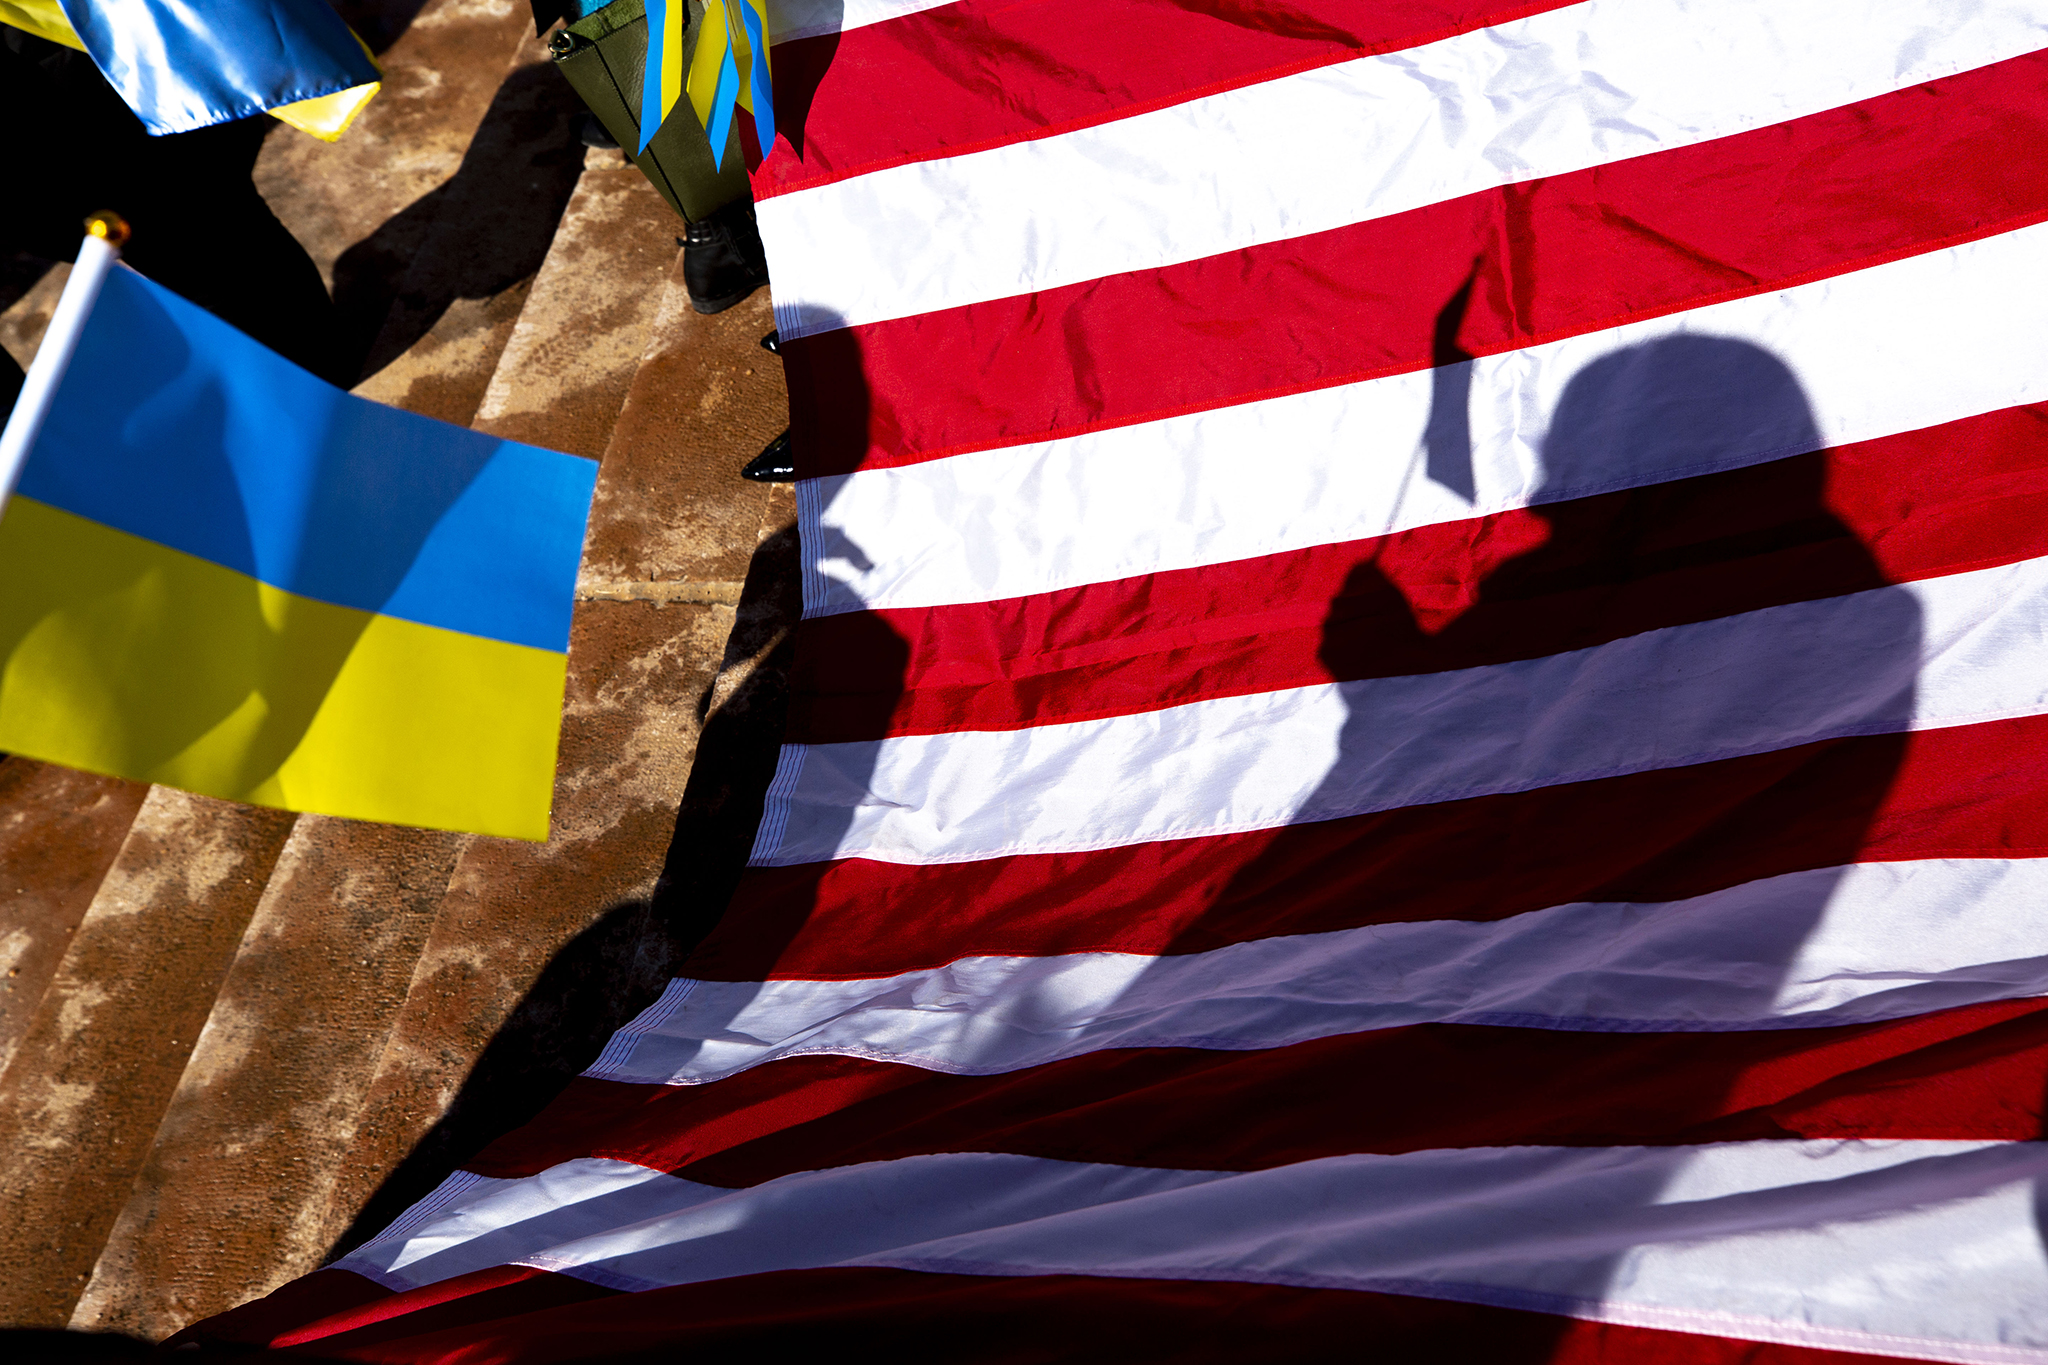 American and Ukrainian flags at a rally against Russian aggression on the Colorado Capitol steps. Feb. 24, 2022.